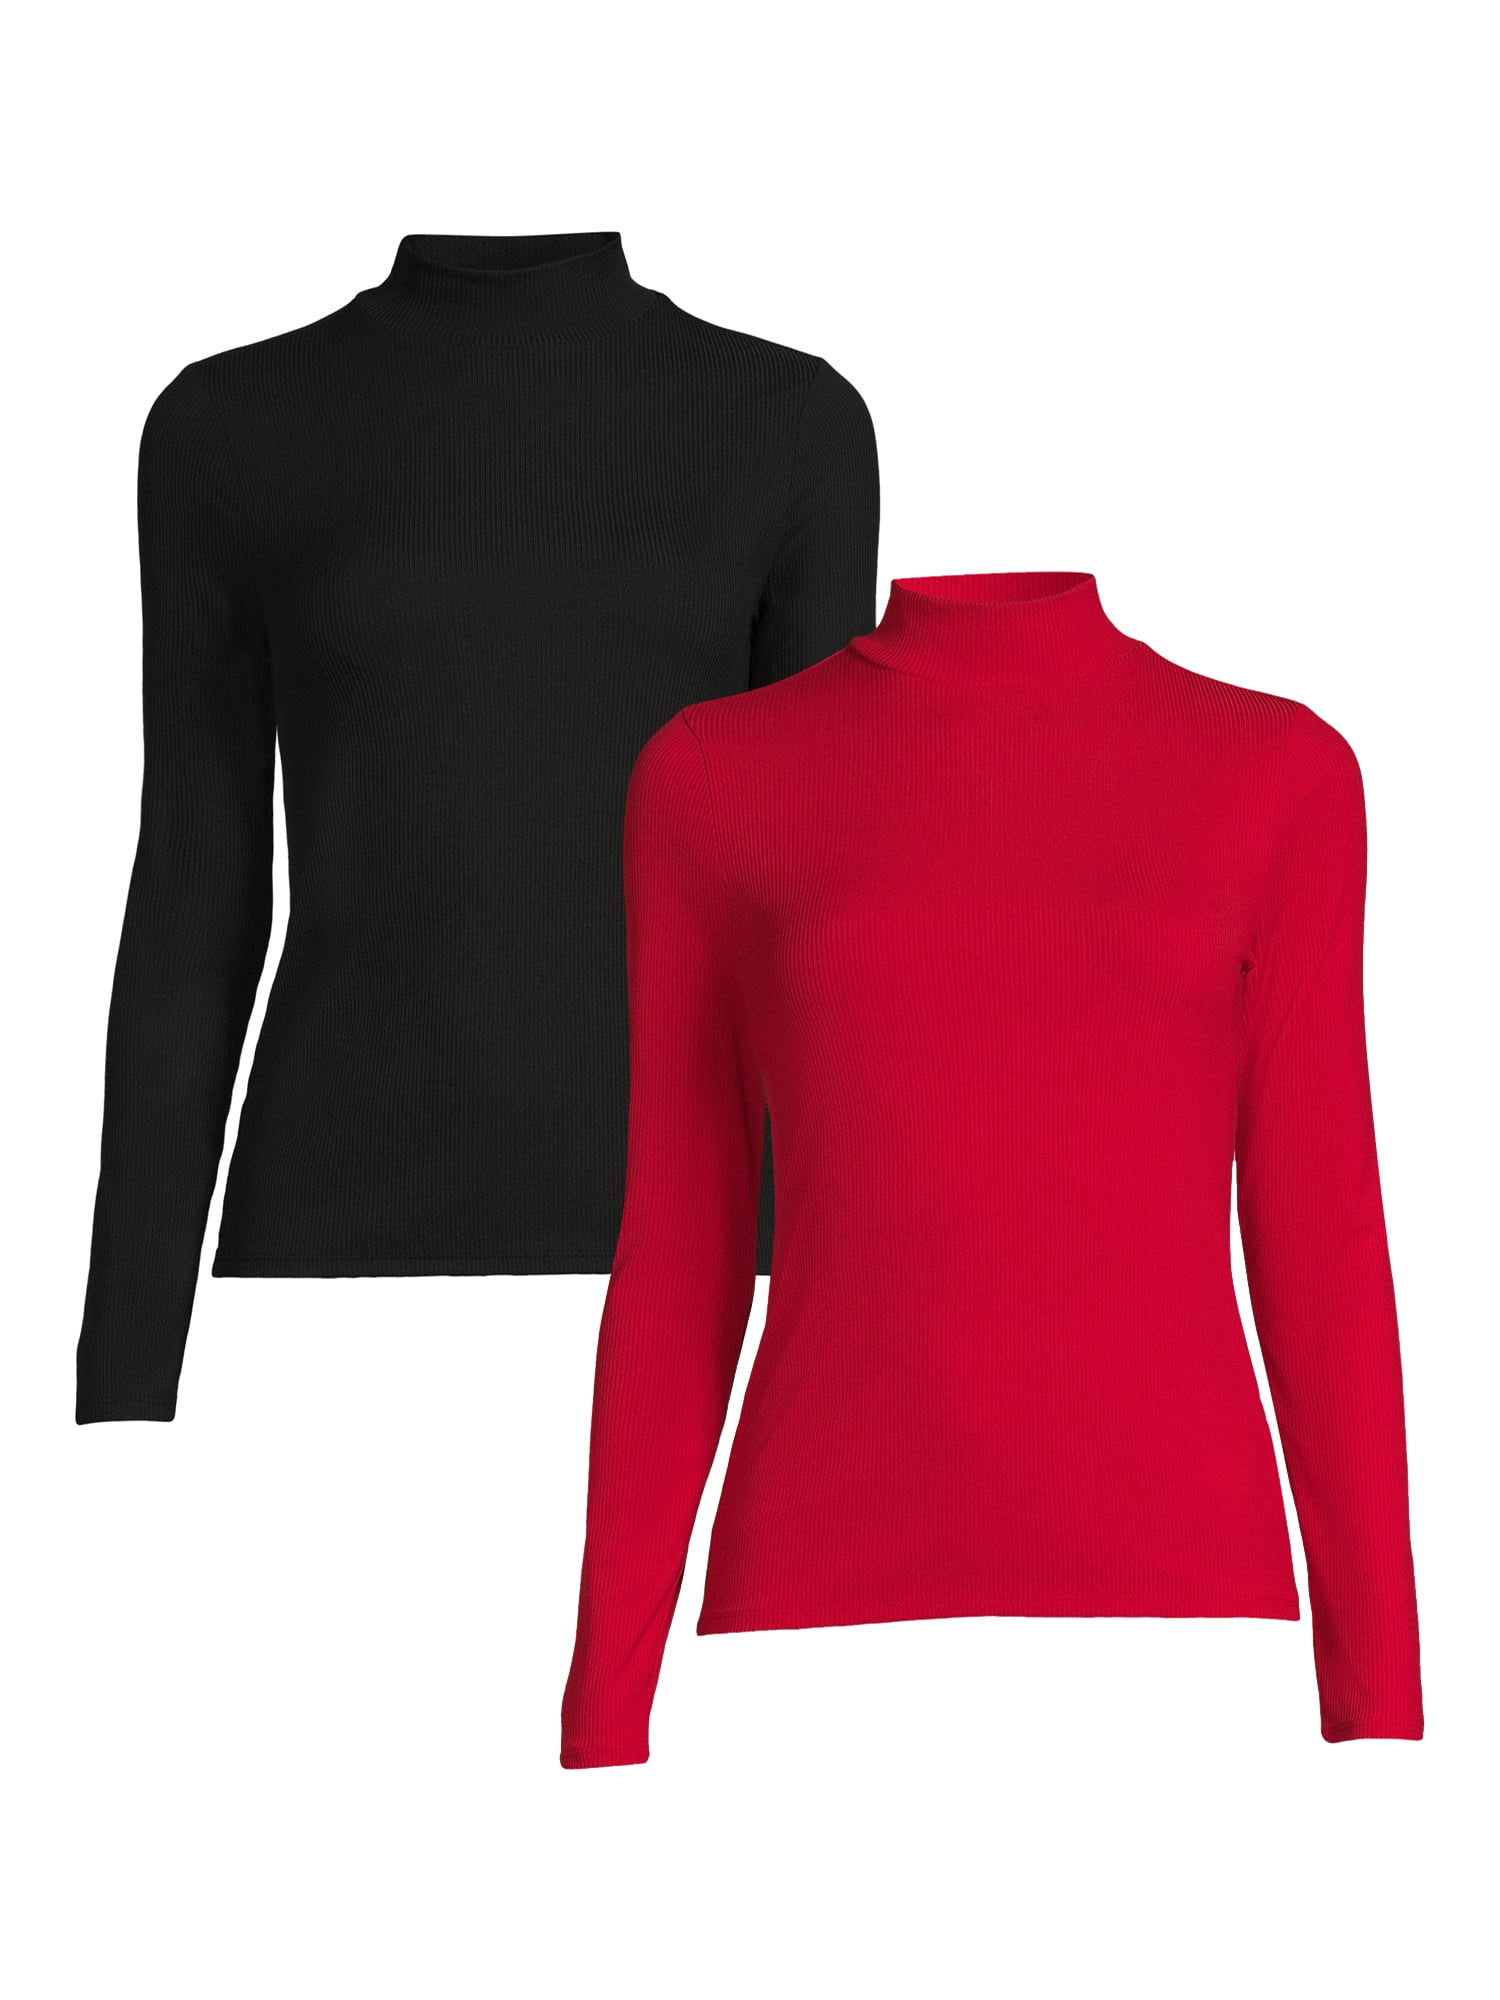 Long Top Boundaries Sleeves, Juniors XS-3XL No Sizes Mock with Neck 2-Pack,